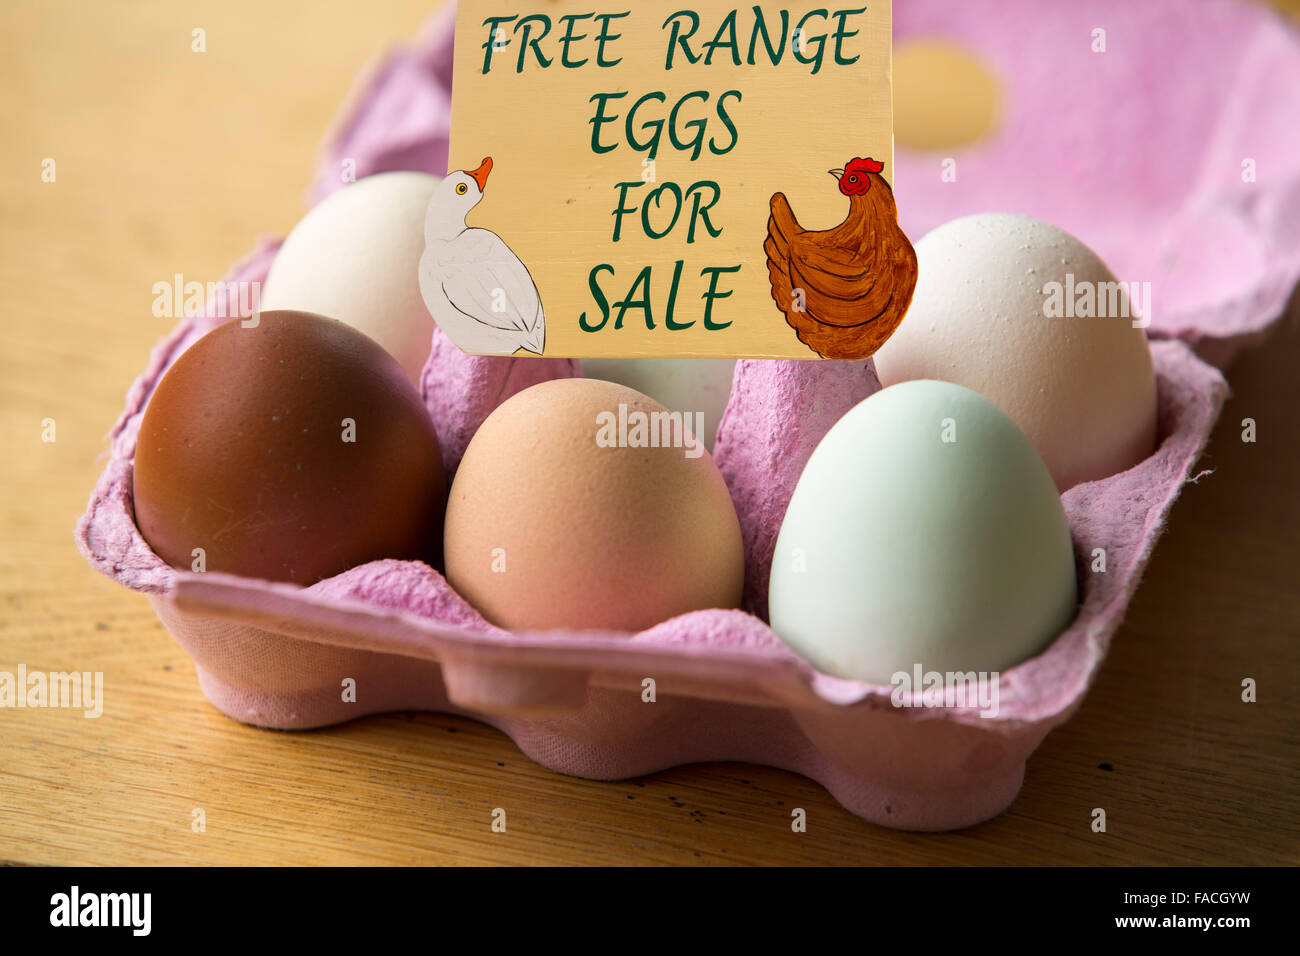 Free range eggs from happy chickens of different breeds. Stock Photo